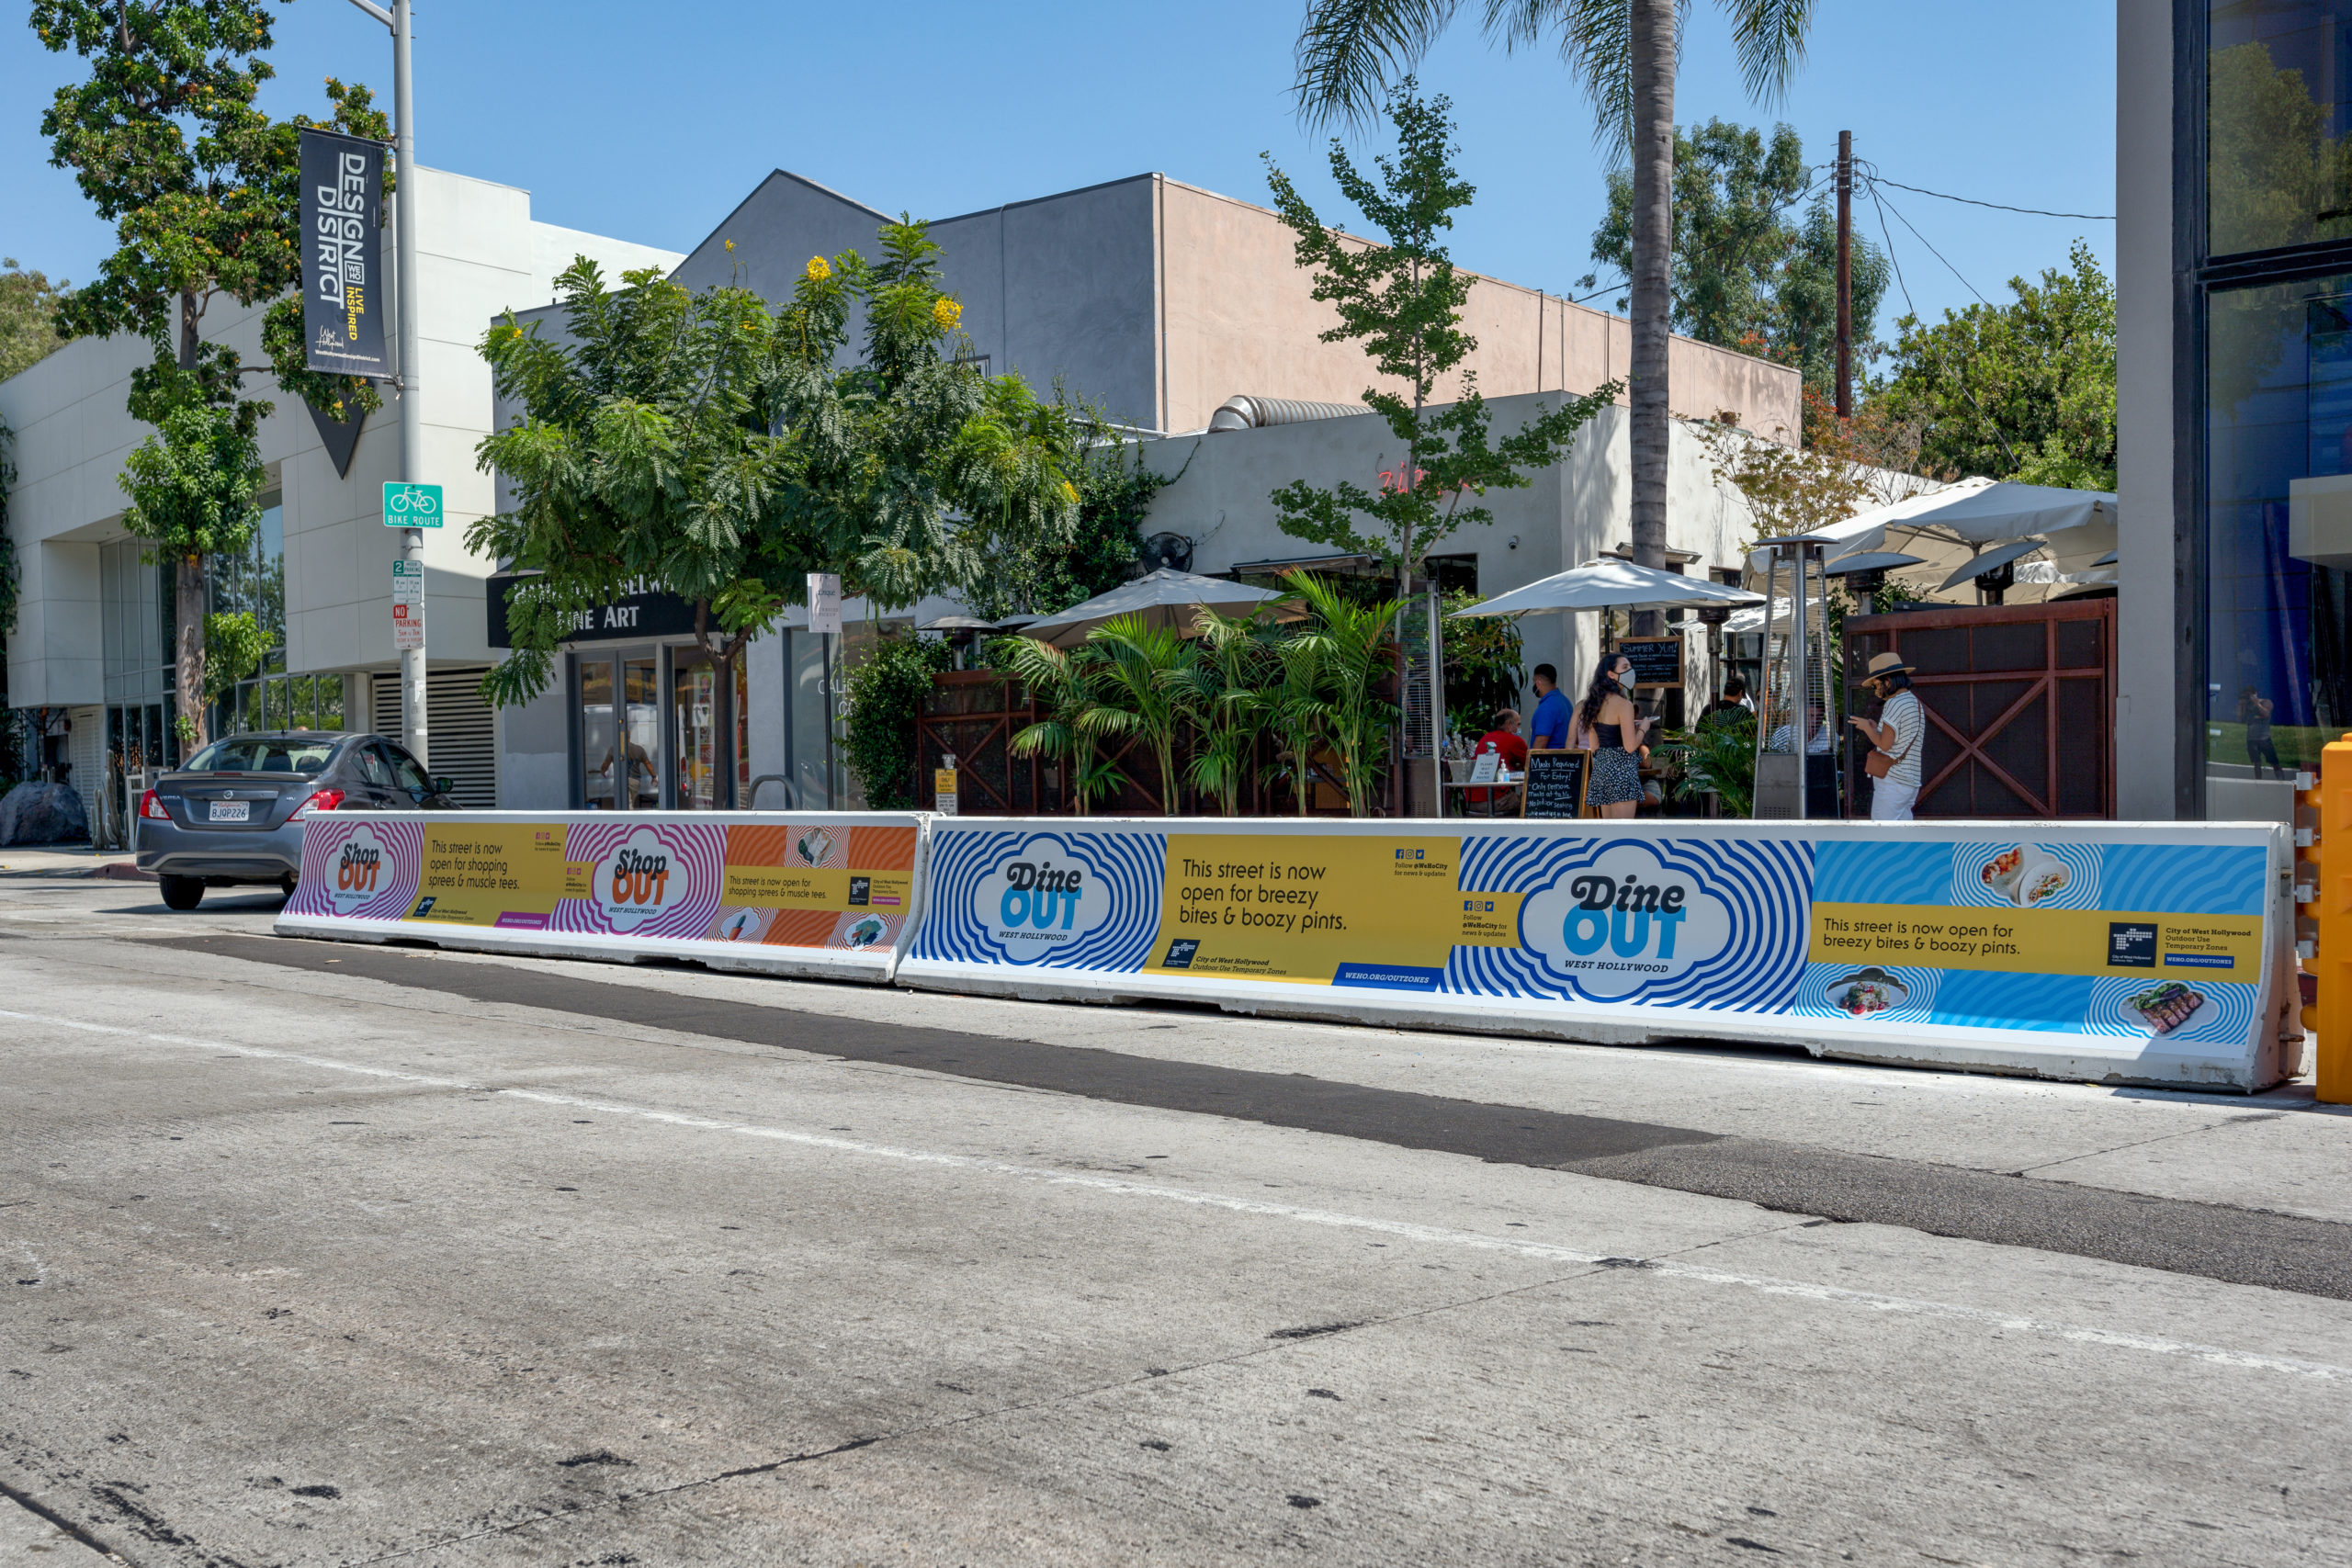 Branded WeHo OUT K-rail barriers seen on Santa Monica Blvd in West Hollywood. Branding and design by Kilter.